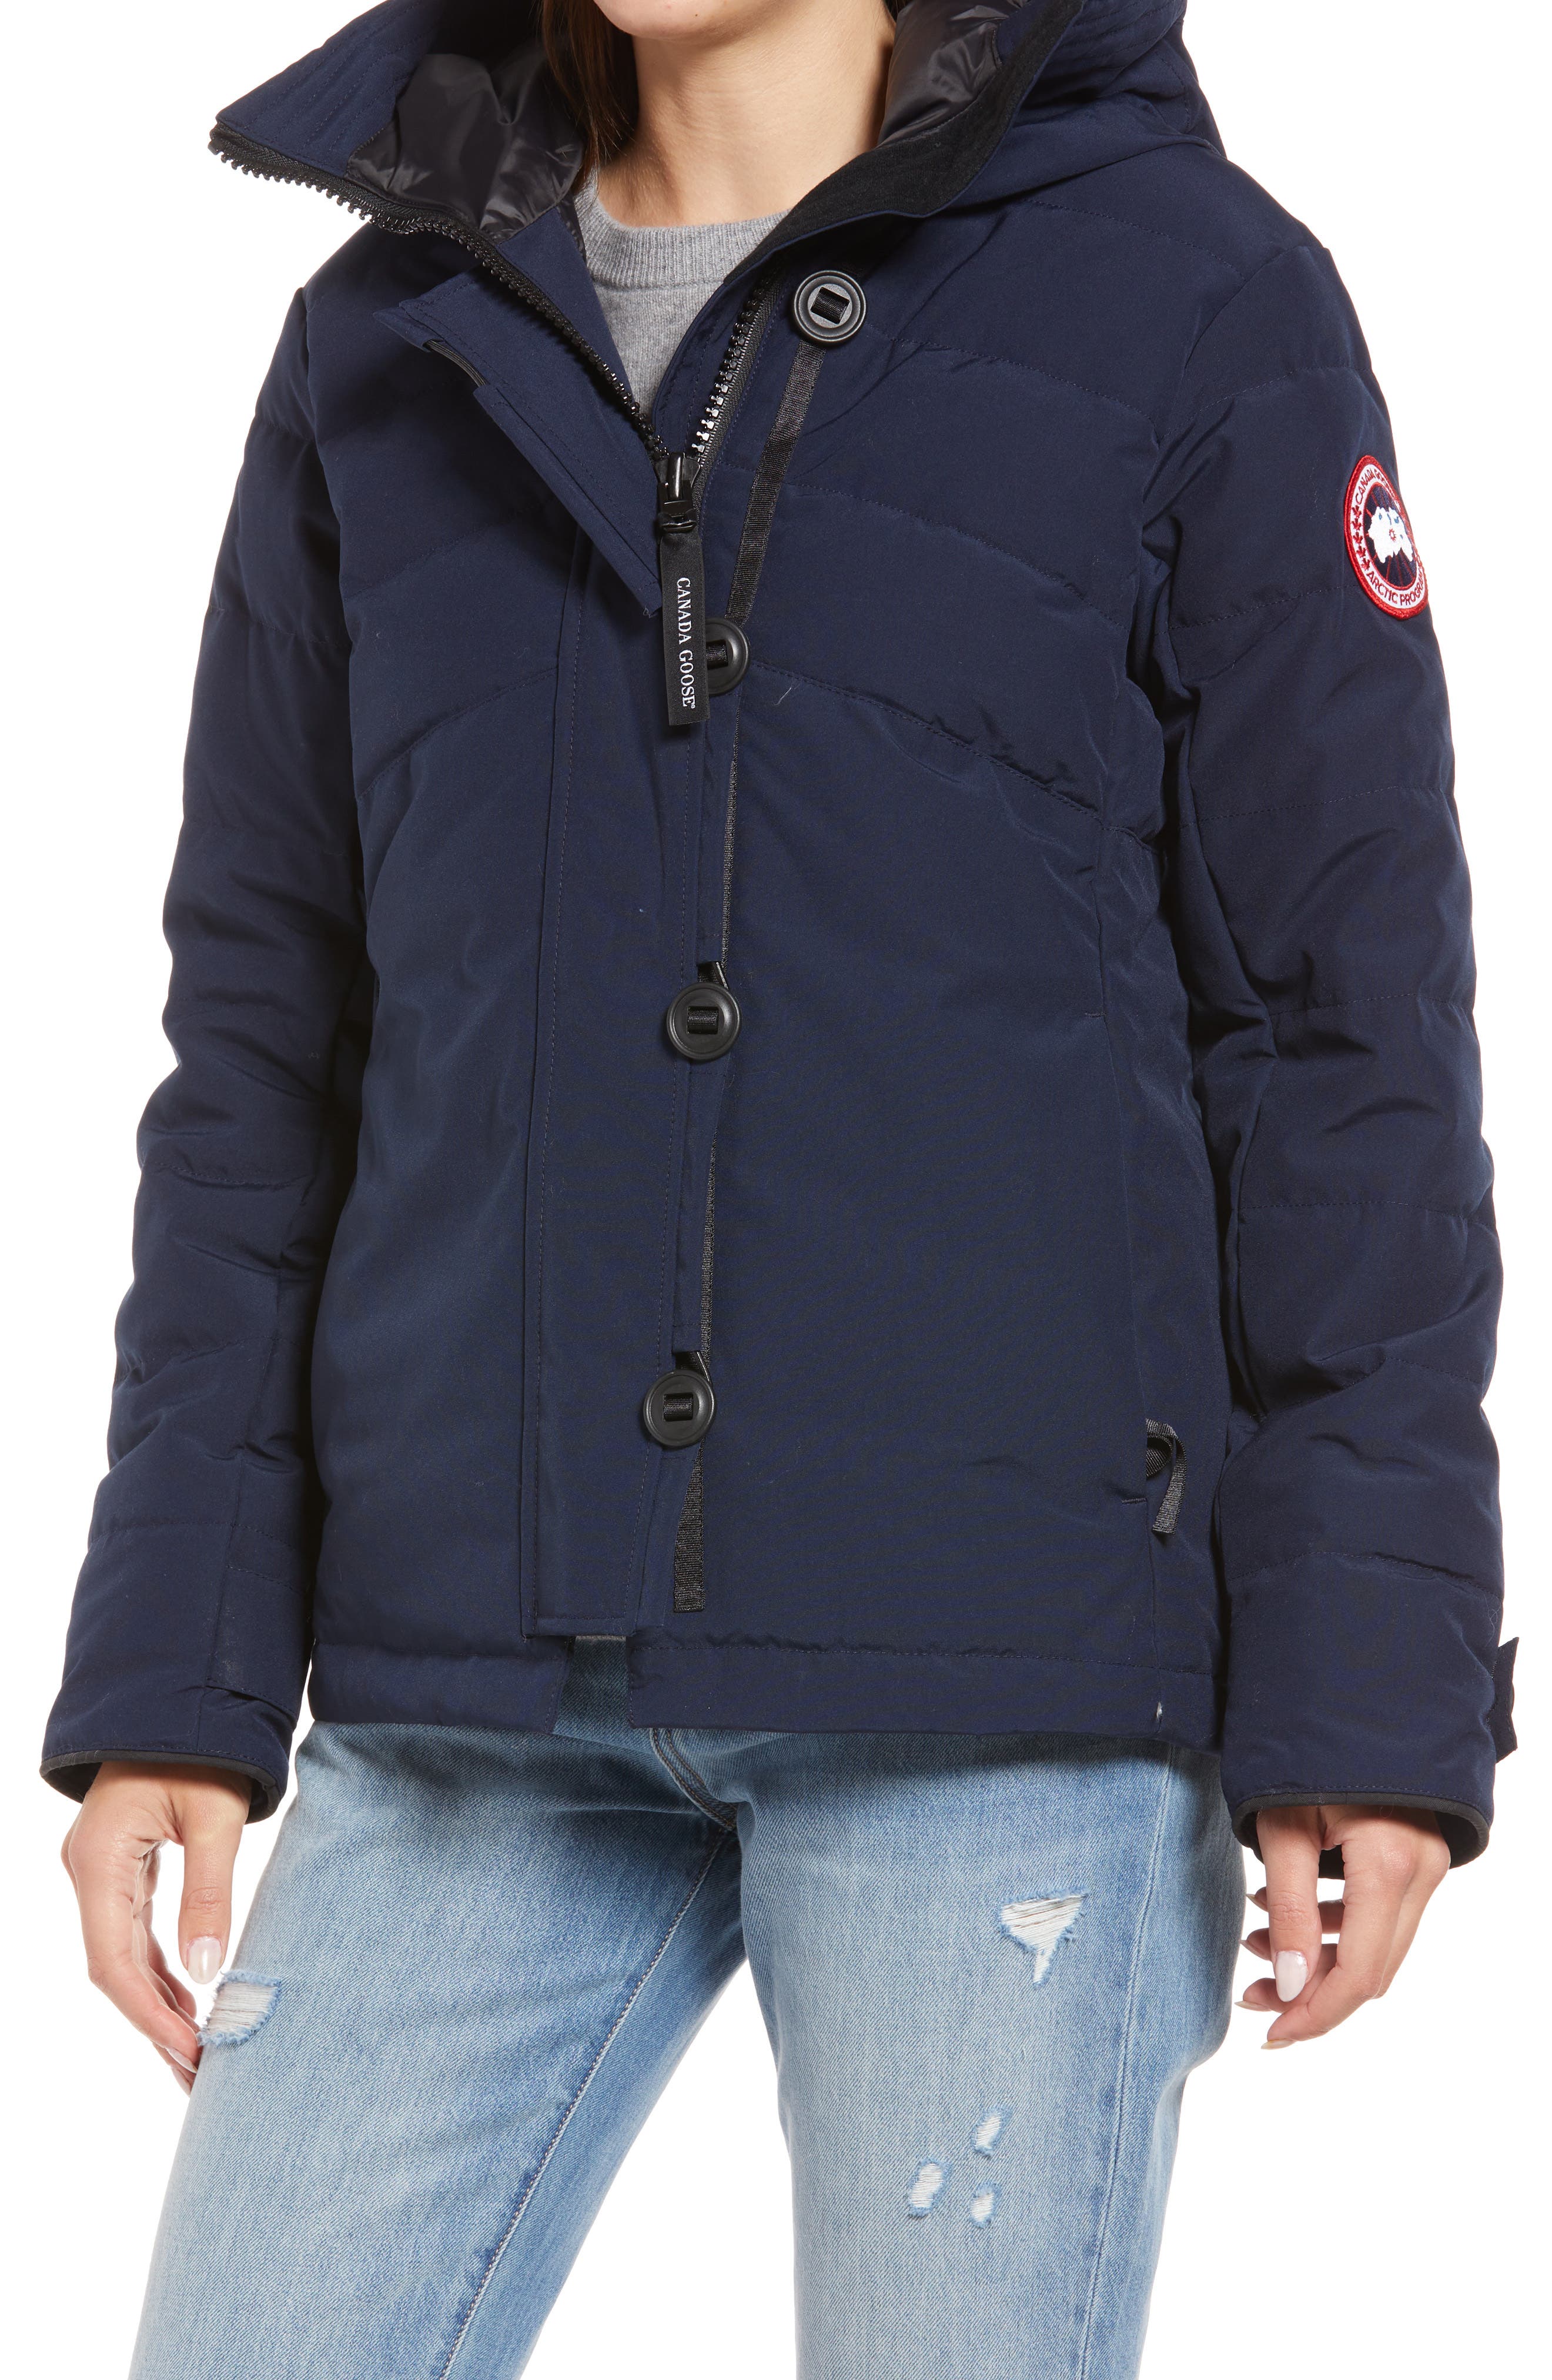 Canada Goose Women's Elmvale Water Resistant Parka in Atlantic Navy at Nordstrom, Size X-Small